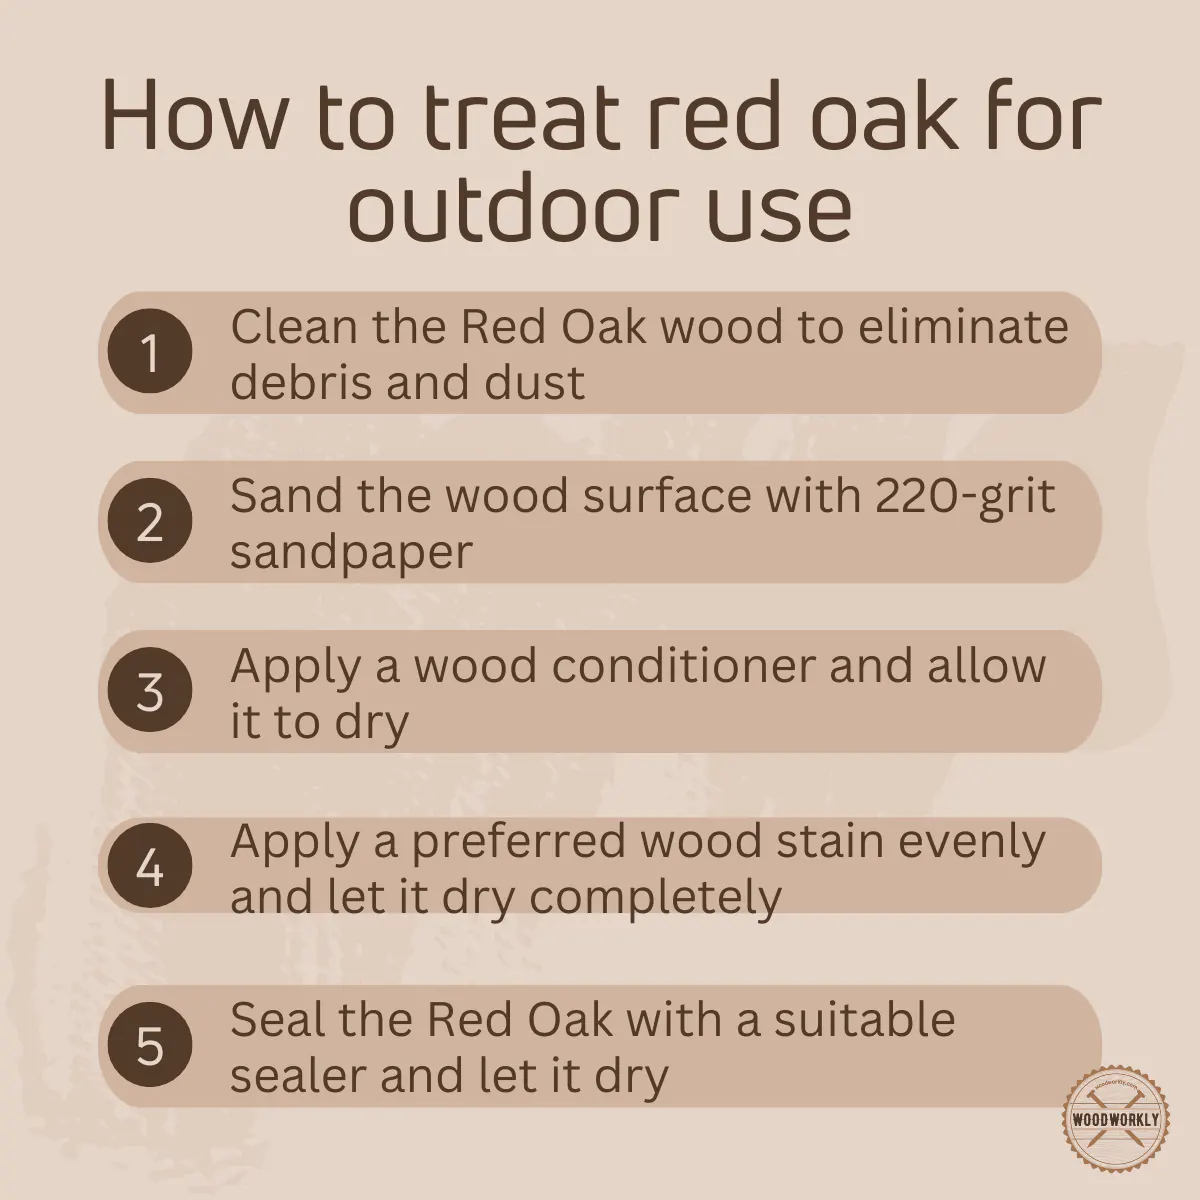 How to treat red oak for outdoor use